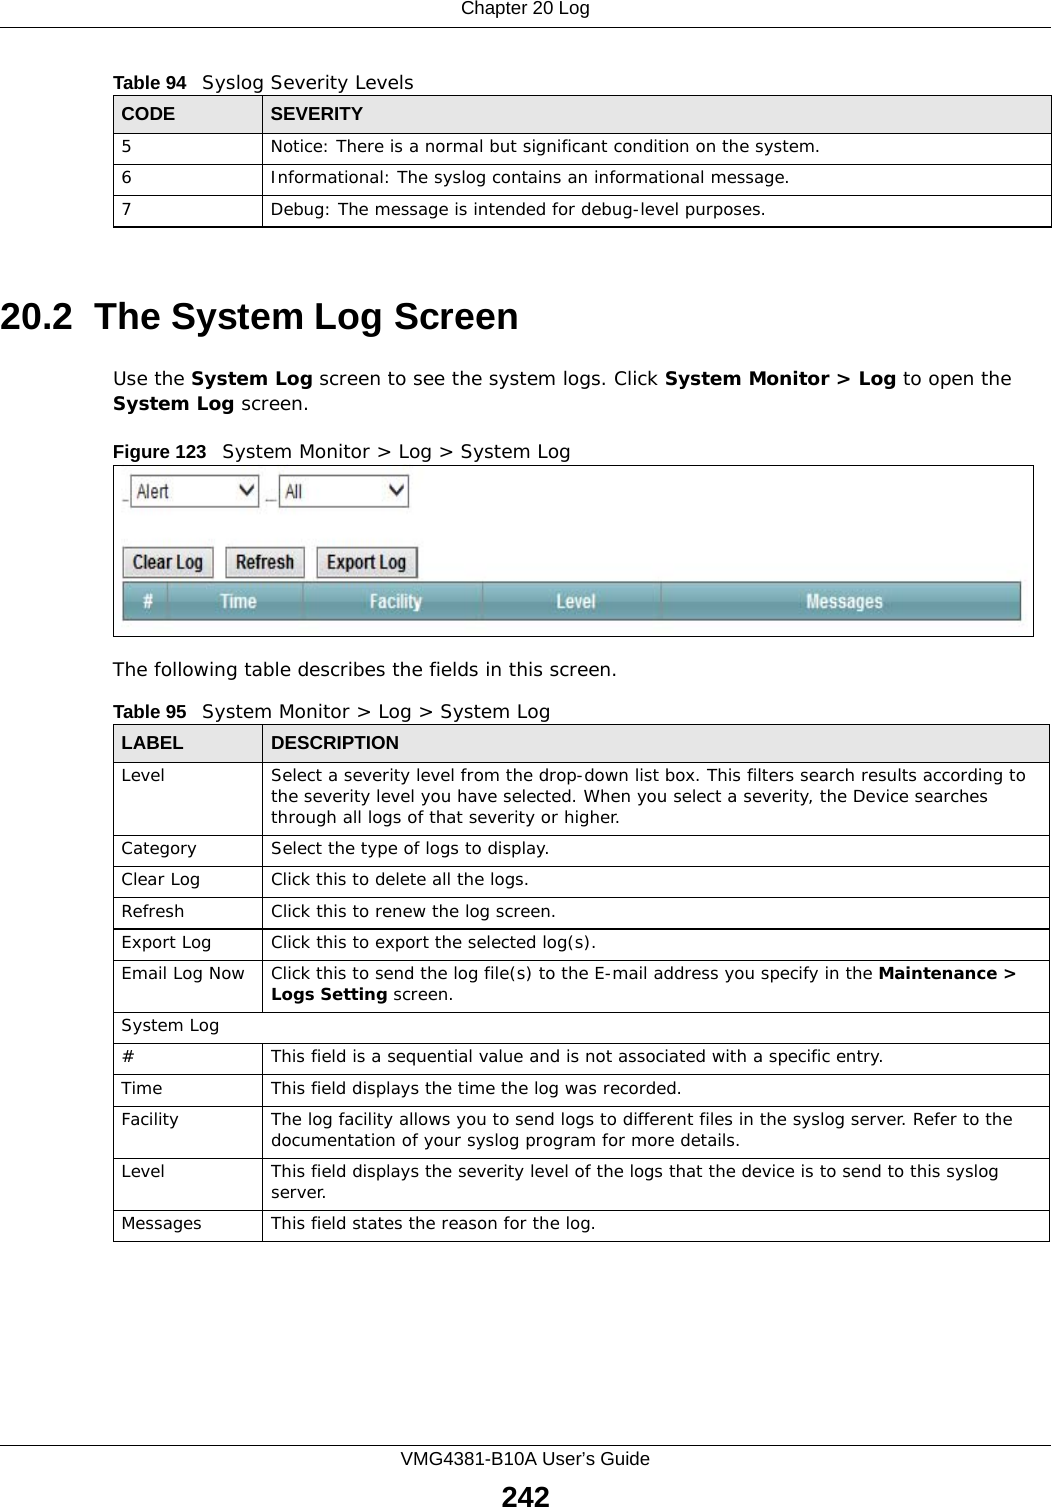 Chapter 20 LogVMG4381-B10A User’s Guide24220.2  The System Log Screen Use the System Log screen to see the system logs. Click System Monitor &gt; Log to open the System Log screen. Figure 123   System Monitor &gt; Log &gt; System LogThe following table describes the fields in this screen.   5 Notice: There is a normal but significant condition on the system.6 Informational: The syslog contains an informational message.7 Debug: The message is intended for debug-level purposes.Table 94   Syslog Severity LevelsCODE SEVERITYTable 95   System Monitor &gt; Log &gt; System LogLABEL DESCRIPTIONLevel Select a severity level from the drop-down list box. This filters search results according to the severity level you have selected. When you select a severity, the Device searches through all logs of that severity or higher. Category Select the type of logs to display.Clear Log  Click this to delete all the logs. Refresh Click this to renew the log screen. Export Log Click this to export the selected log(s).Email Log Now Click this to send the log file(s) to the E-mail address you specify in the Maintenance &gt; Logs Setting screen.System Log#This field is a sequential value and is not associated with a specific entry.Time  This field displays the time the log was recorded. Facility  The log facility allows you to send logs to different files in the syslog server. Refer to the documentation of your syslog program for more details.Level This field displays the severity level of the logs that the device is to send to this syslog server.Messages This field states the reason for the log.